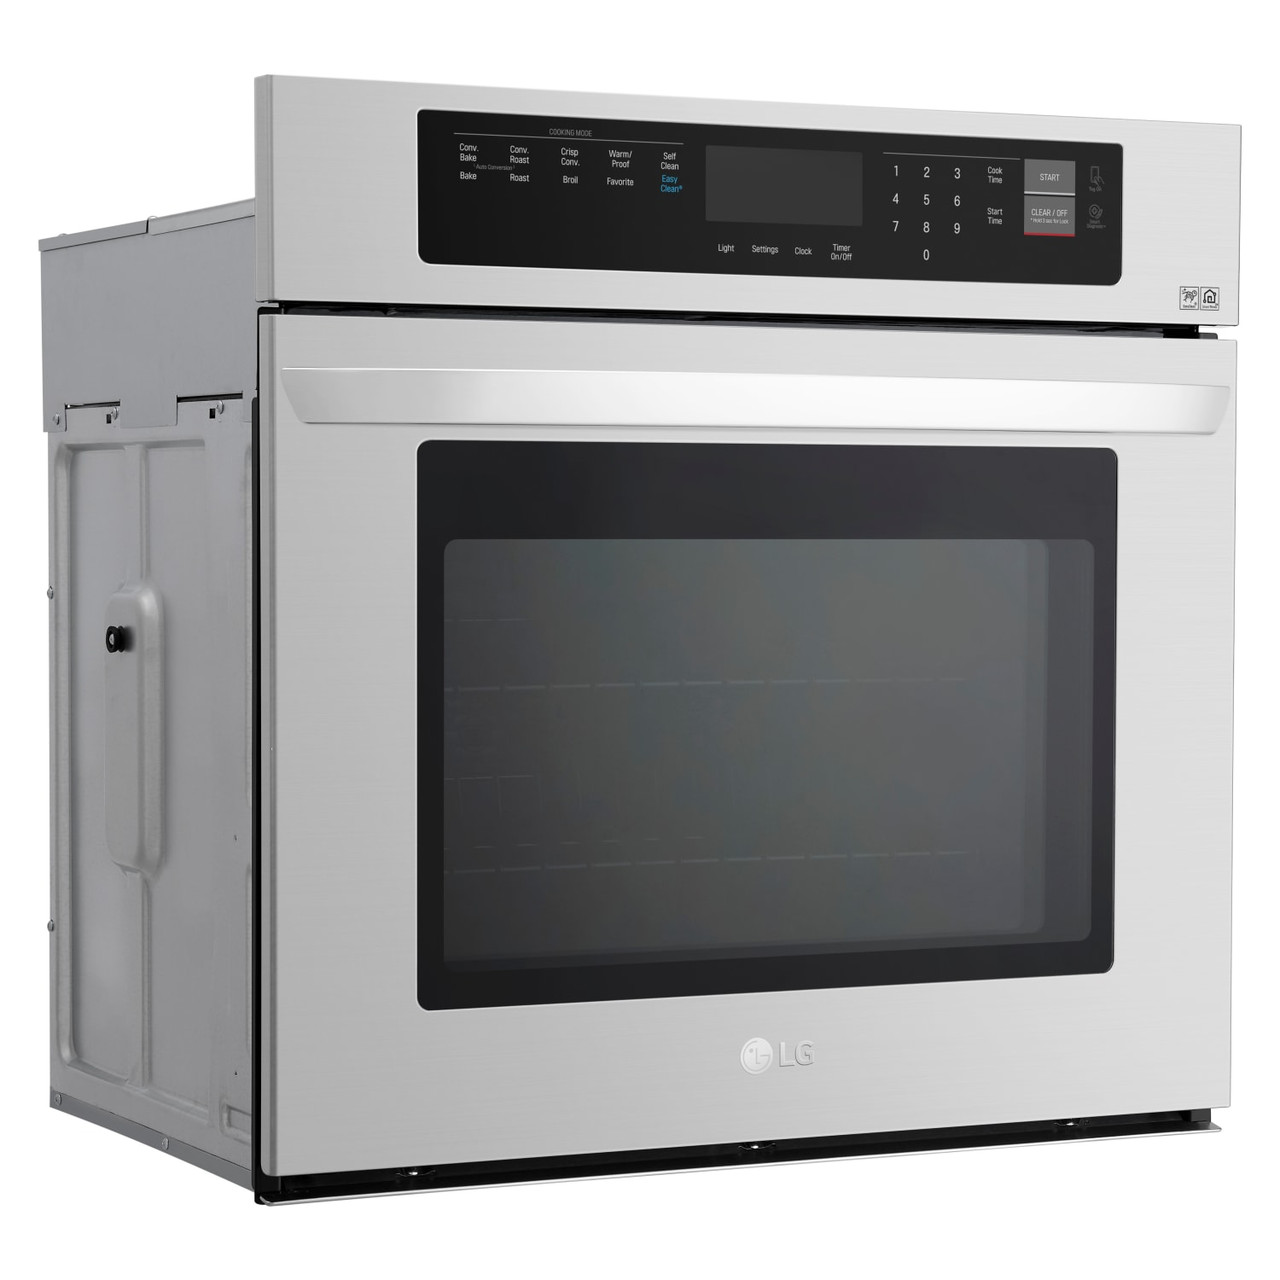 LG 30” 4.7 cu. ft. Built-In Single Wall Oven (LWS3063ST)